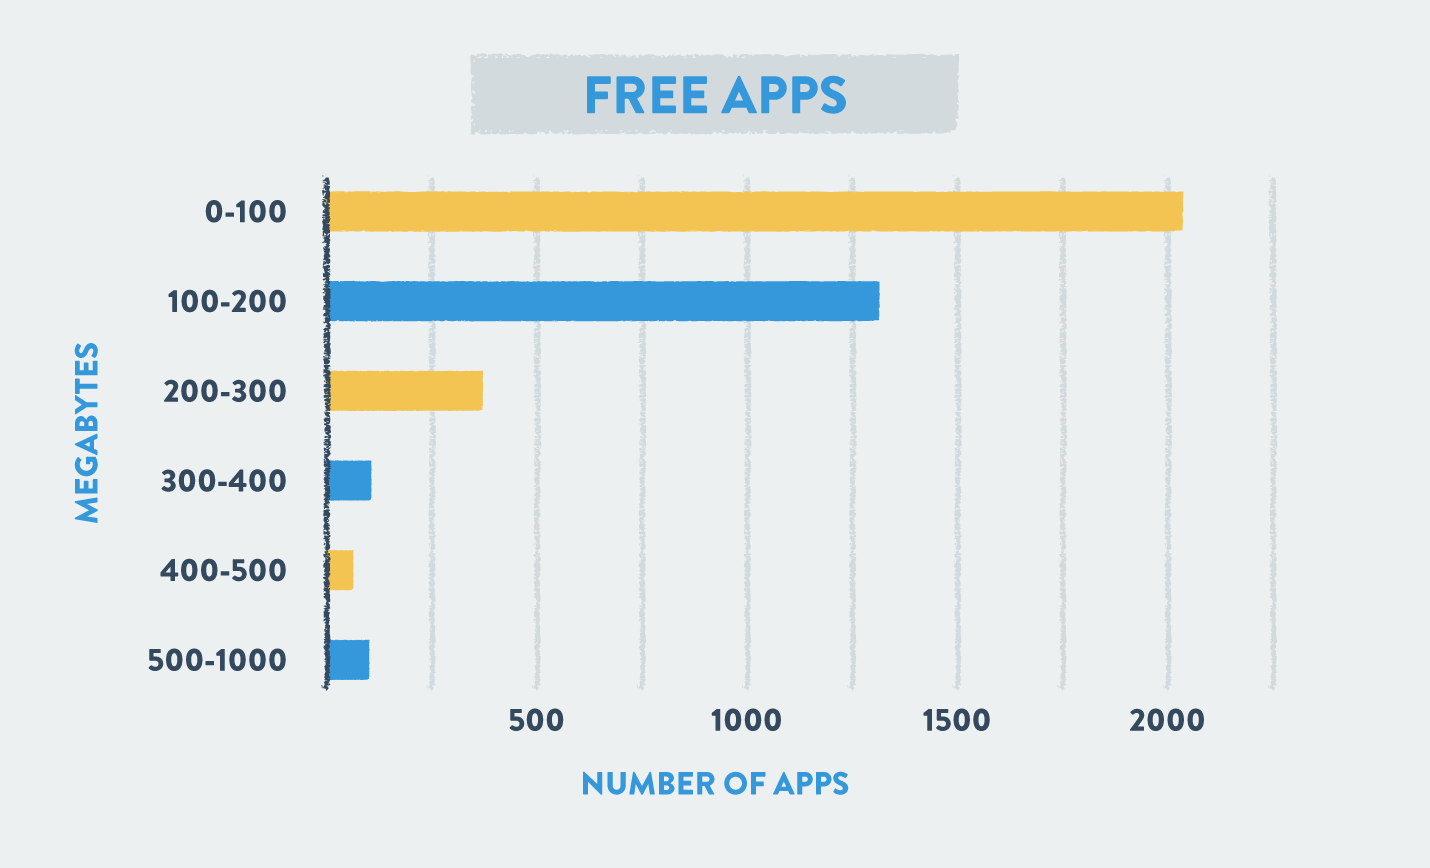 size of free apps by megabytes